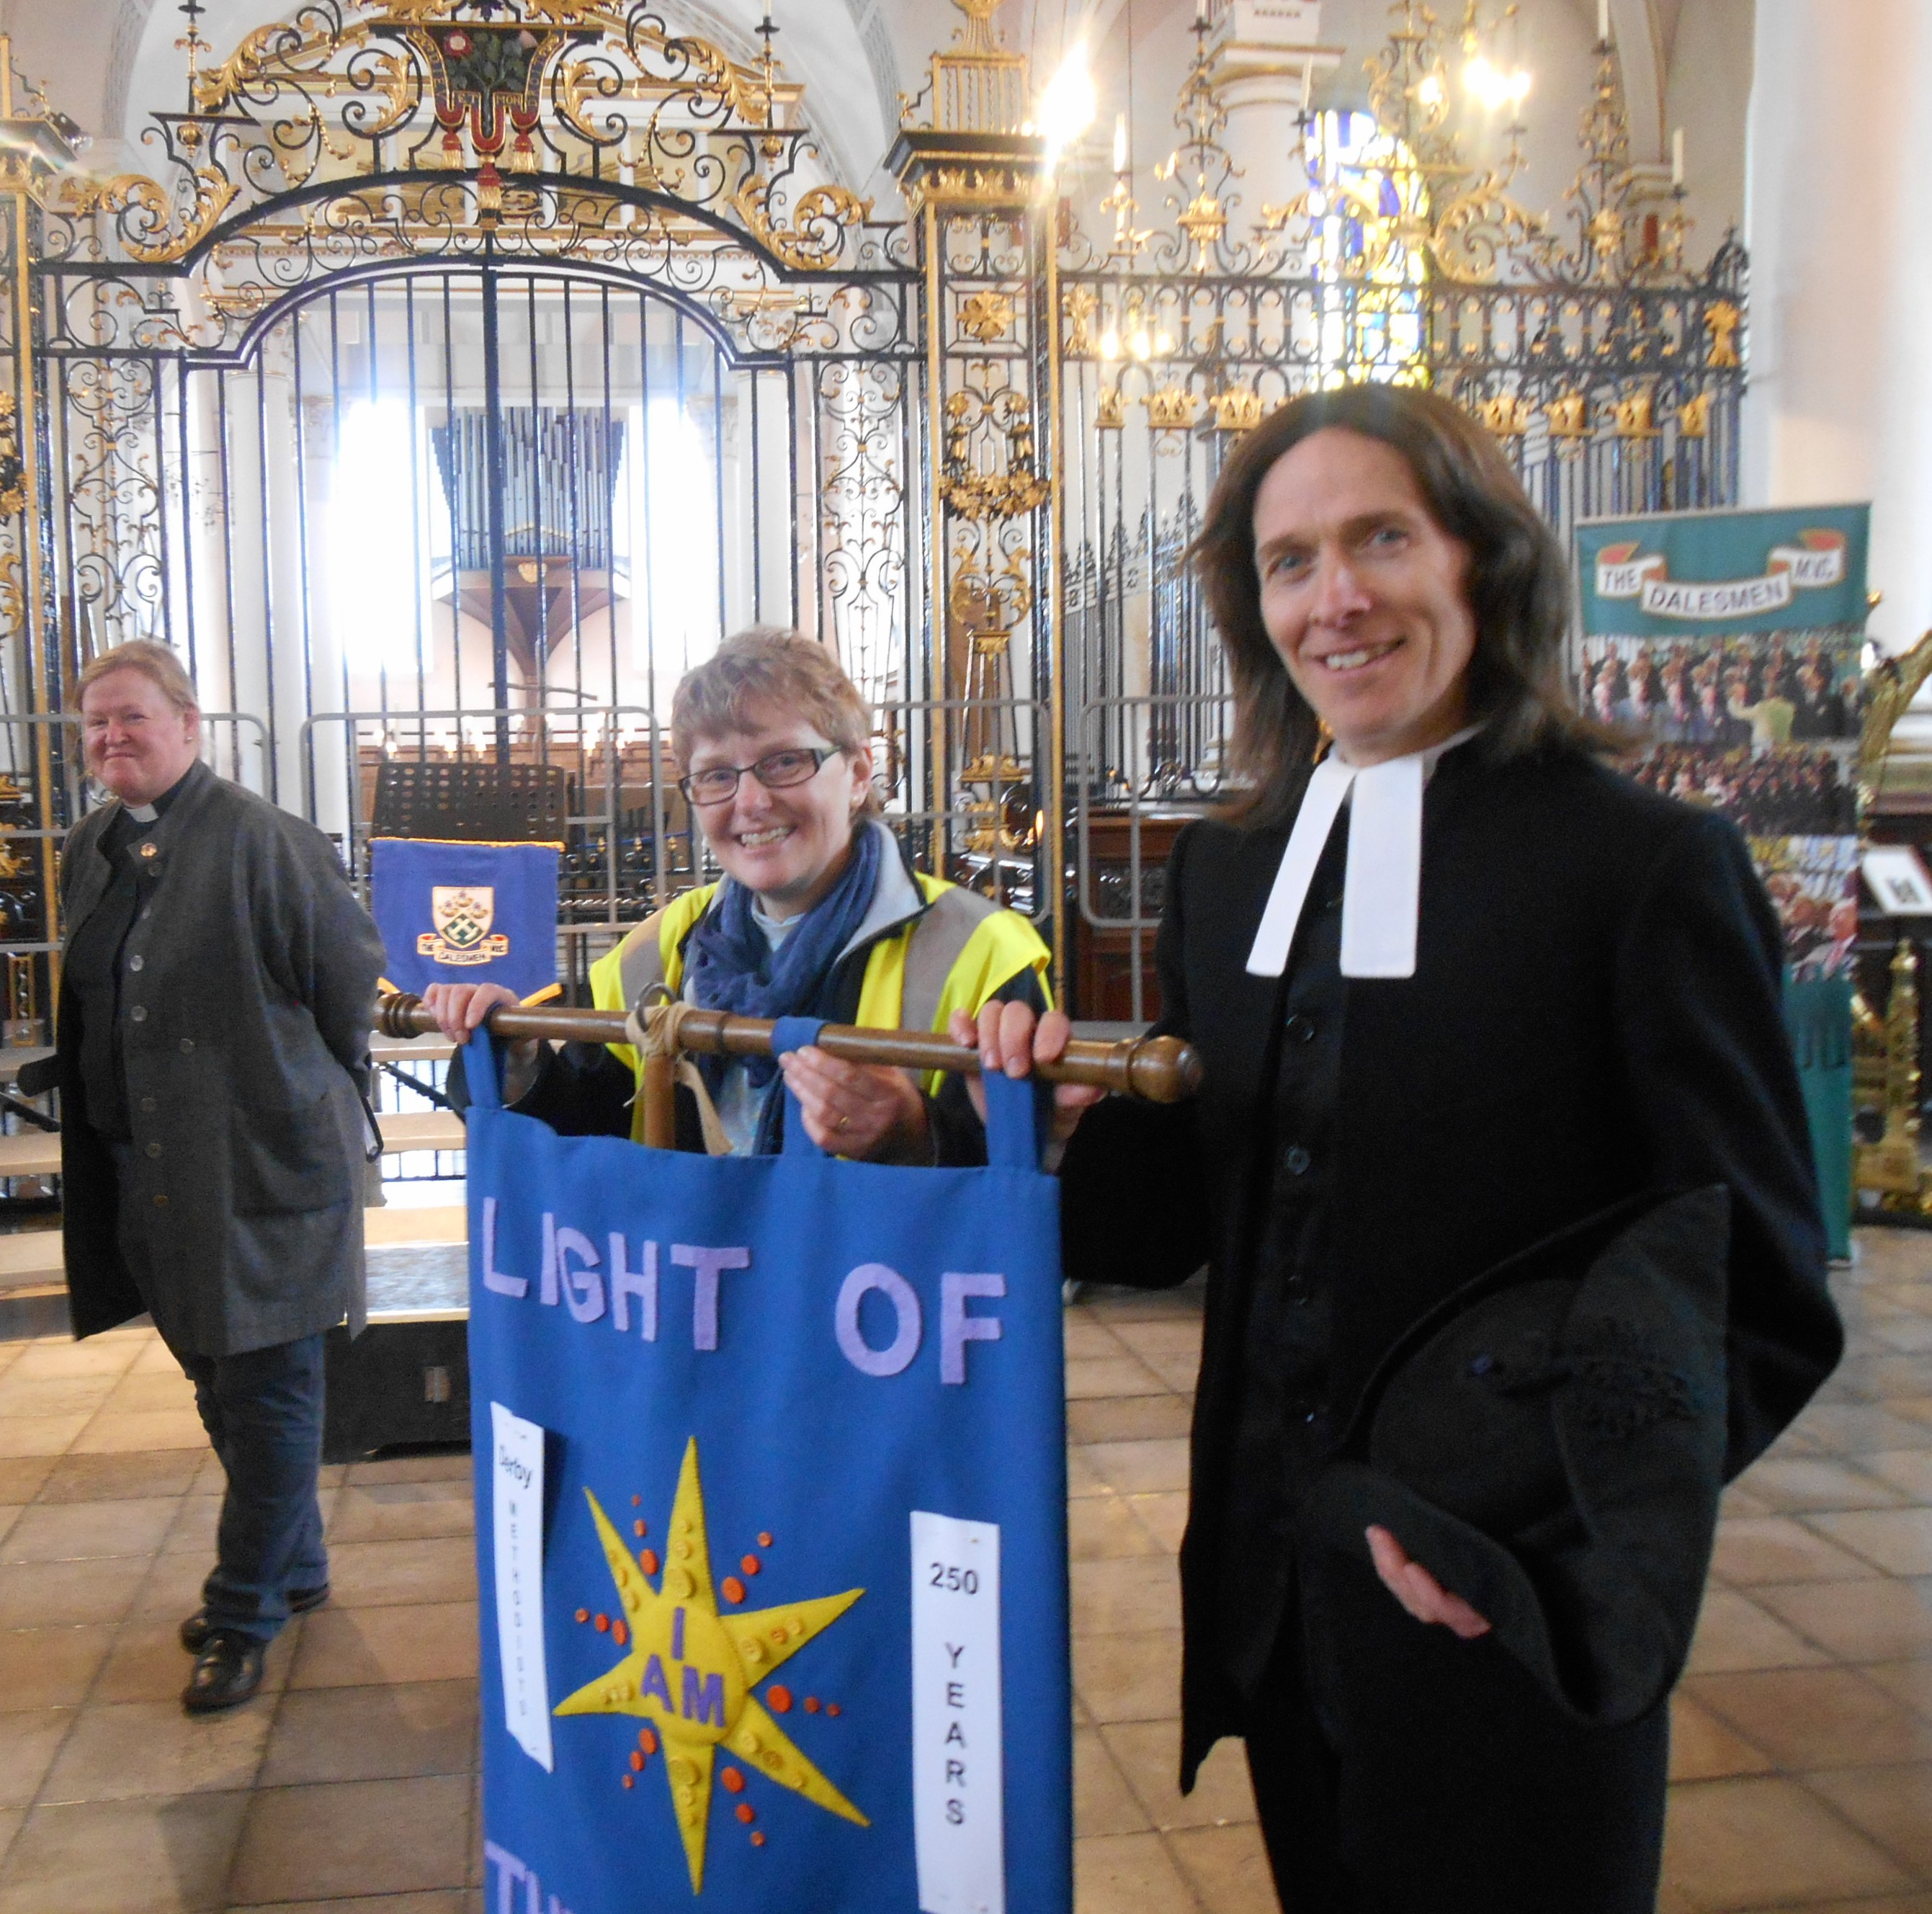 Jenny Dyer and Mark Topping in Derby cathedral